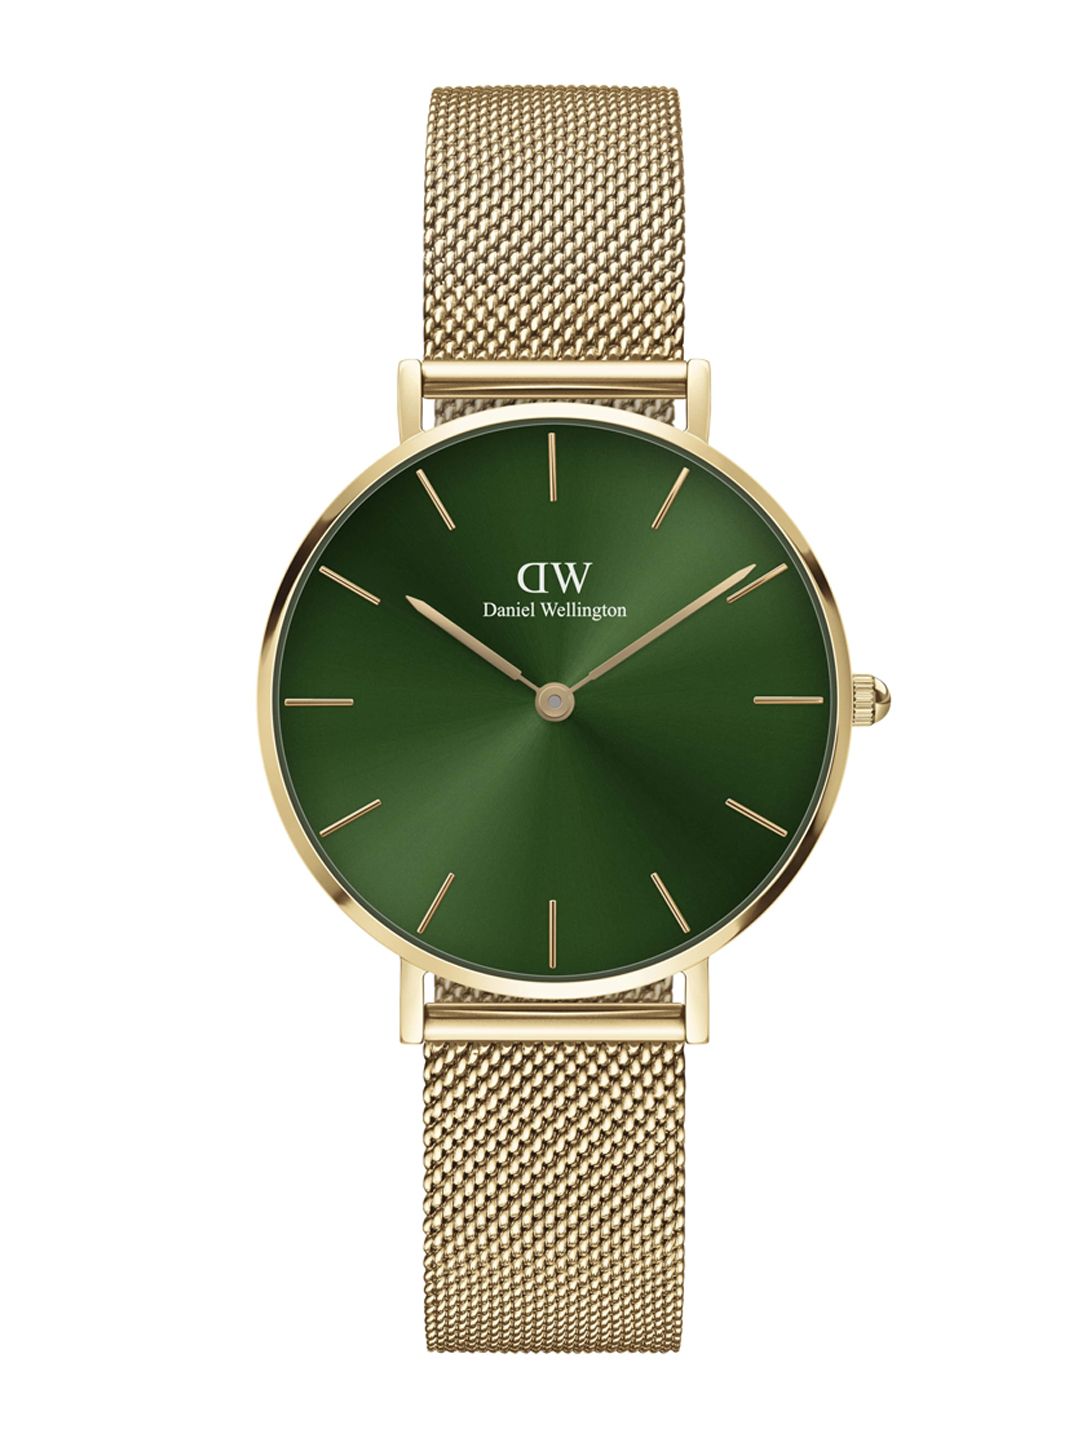 Daniel Wellington Women Green Dial & Gold-Plated Straps Analogue Watch - DW00100480-Gold Price in India